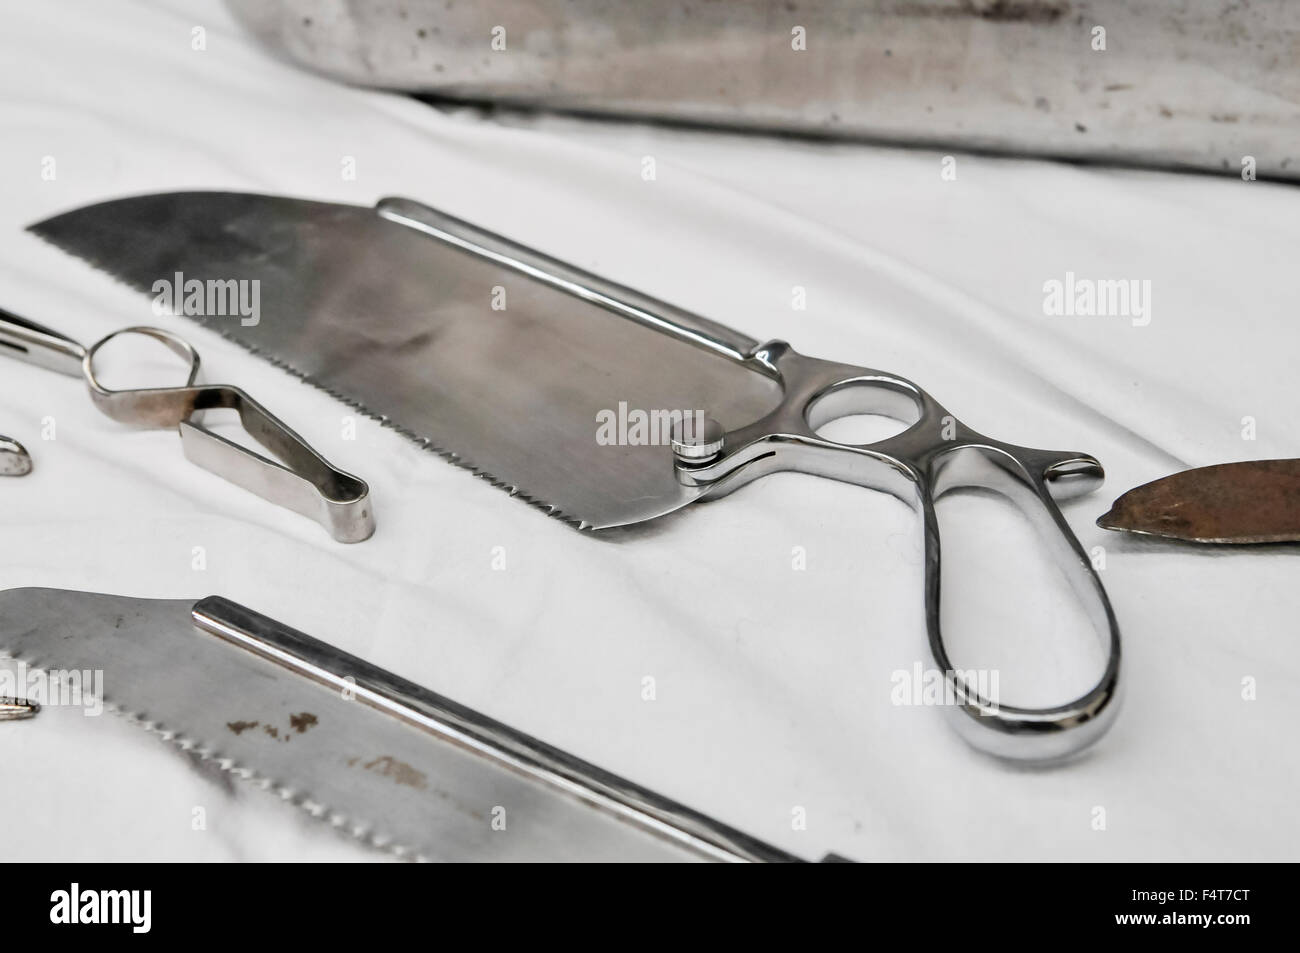 Stainless steel surgical saw Stock Photo